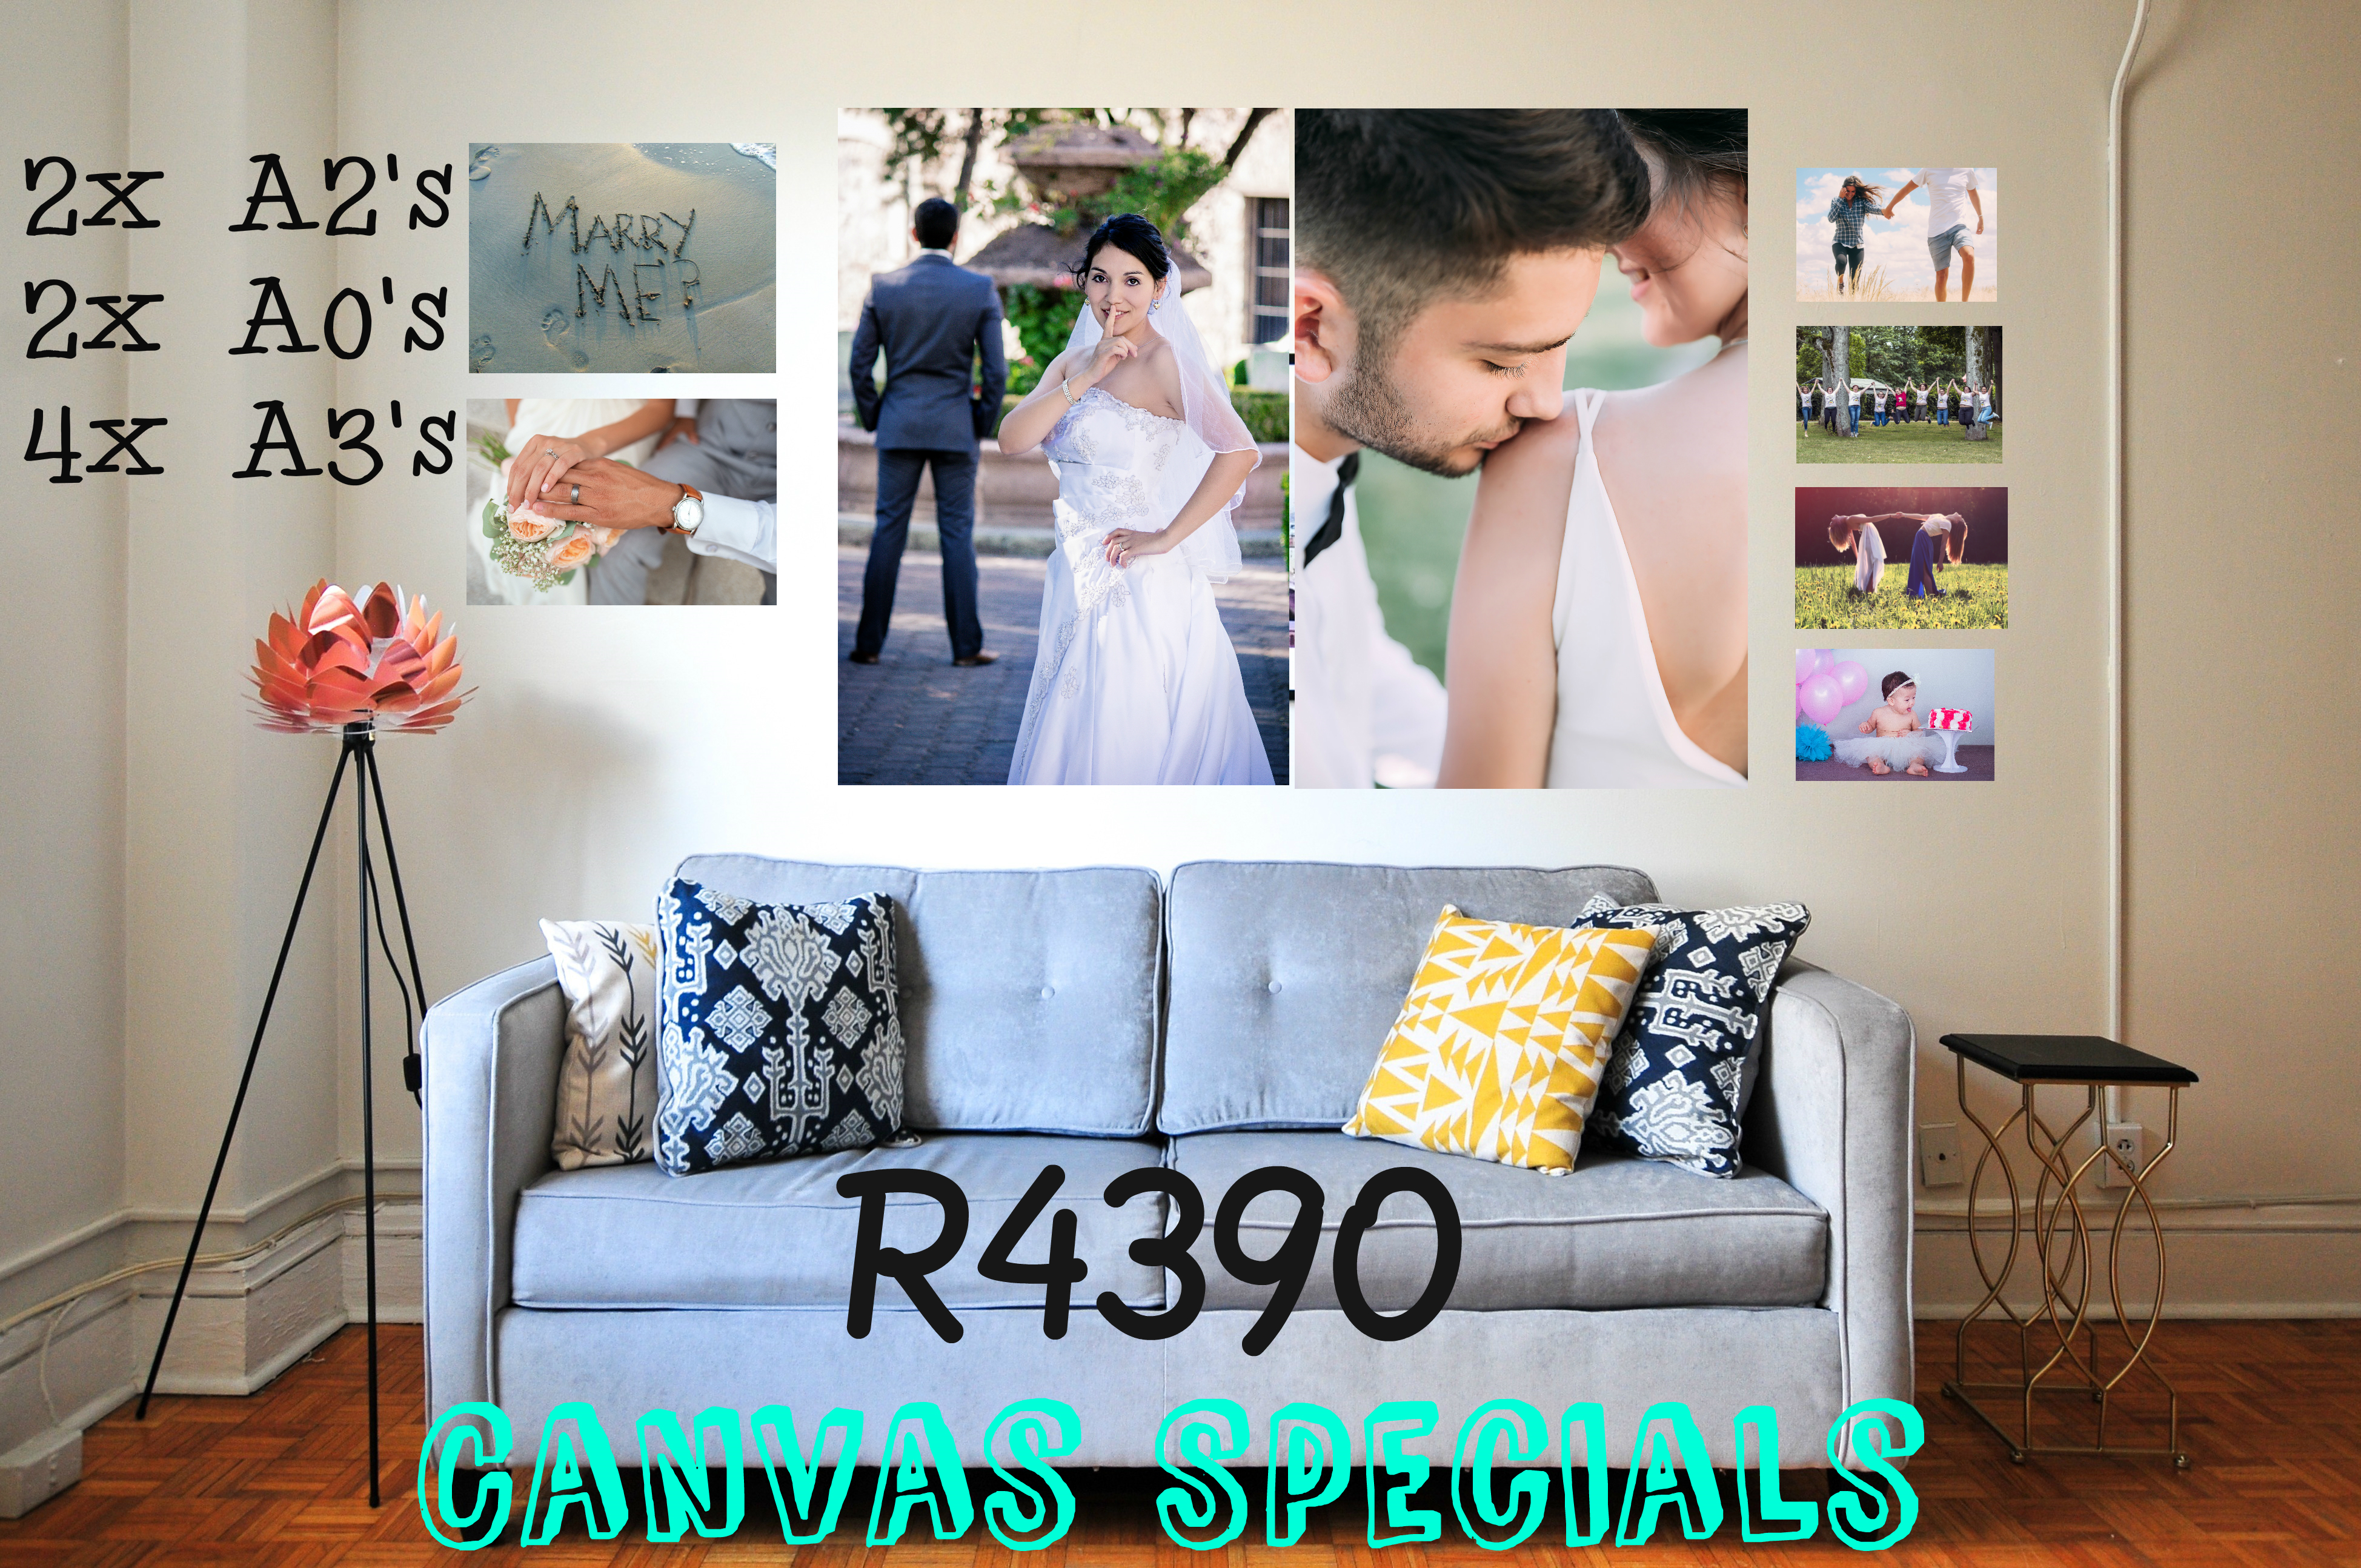 We are running specials on Canvas frames and prints, please check our Website for details or call us.